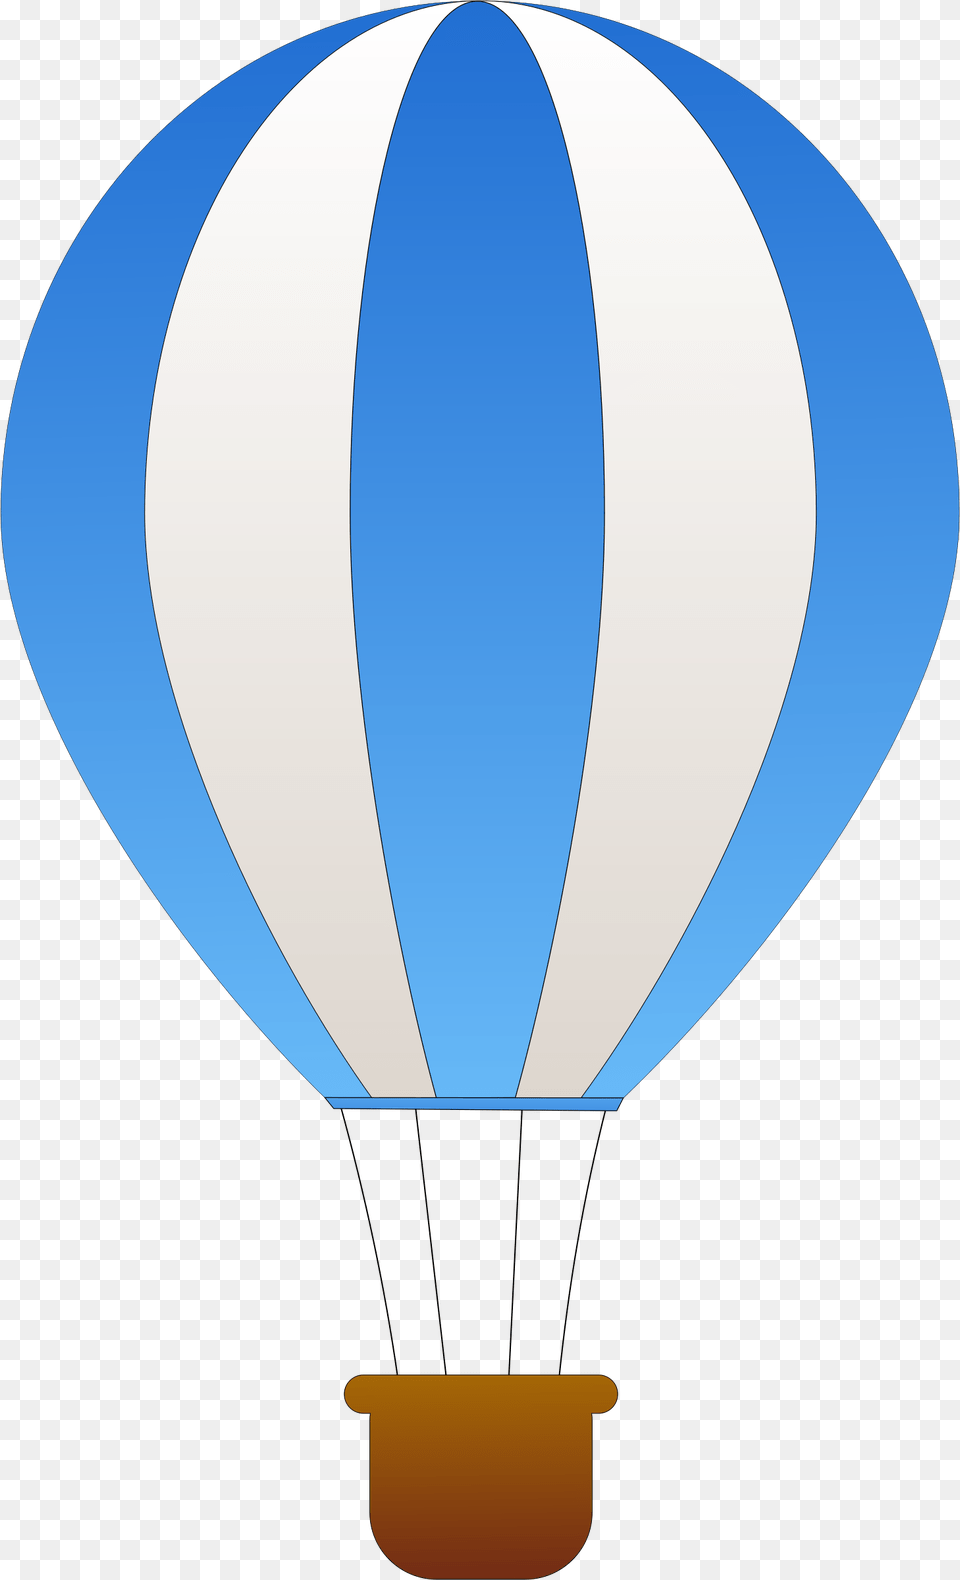 Download Clipart Hot Air Balloons Hot Air Balloon Clipart, Aircraft, Hot Air Balloon, Transportation, Vehicle Free Transparent Png